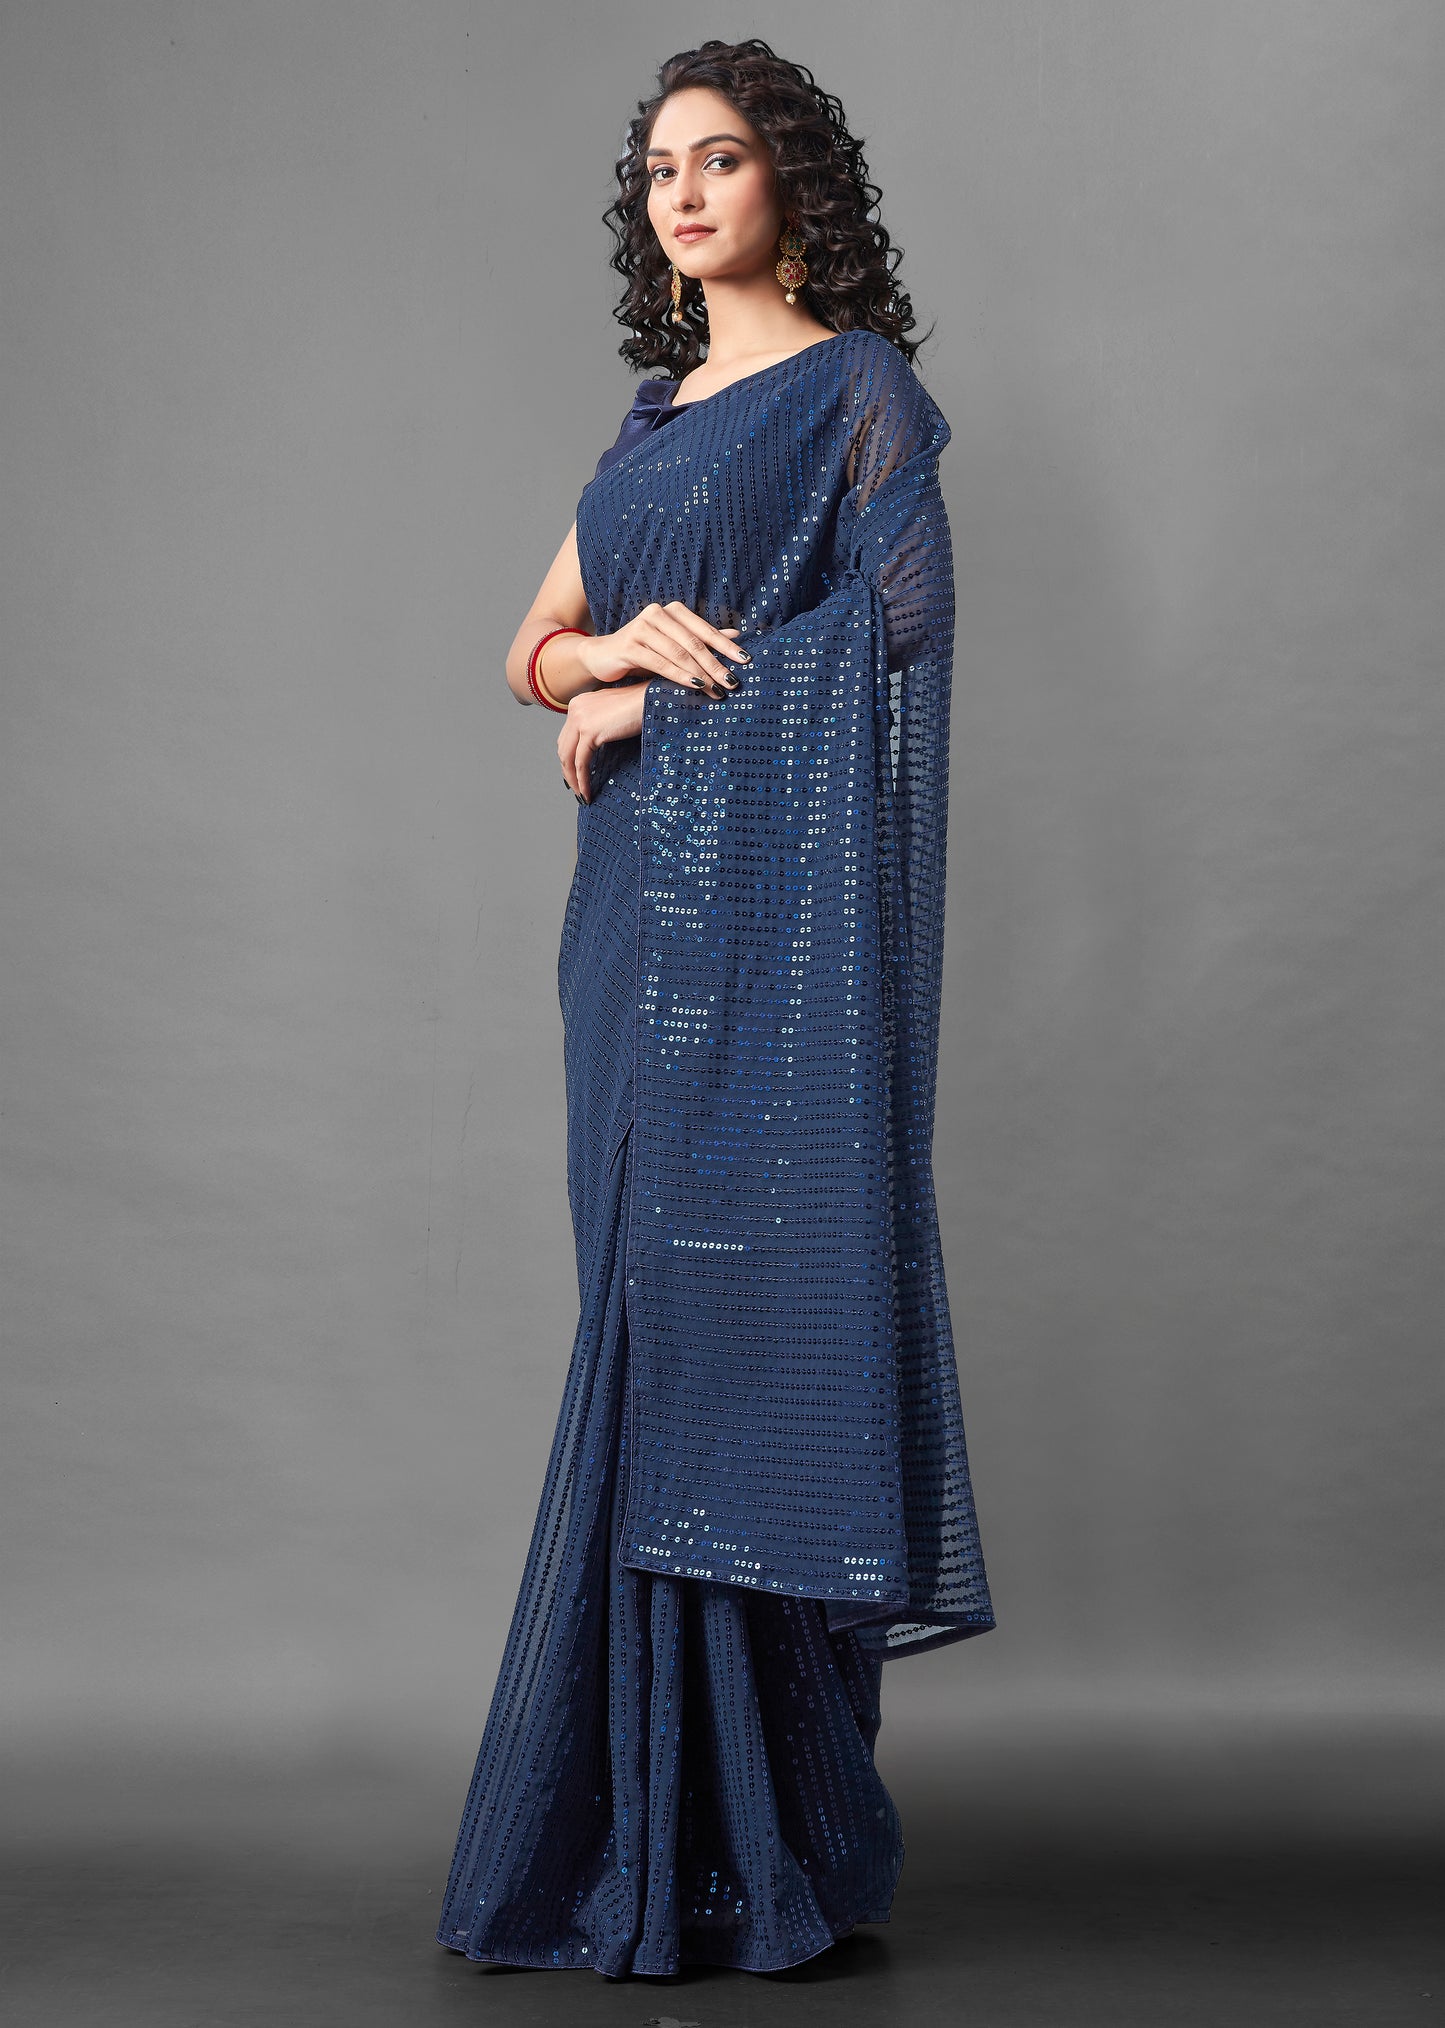 Buy Navy Blue Embellished Saree online in India